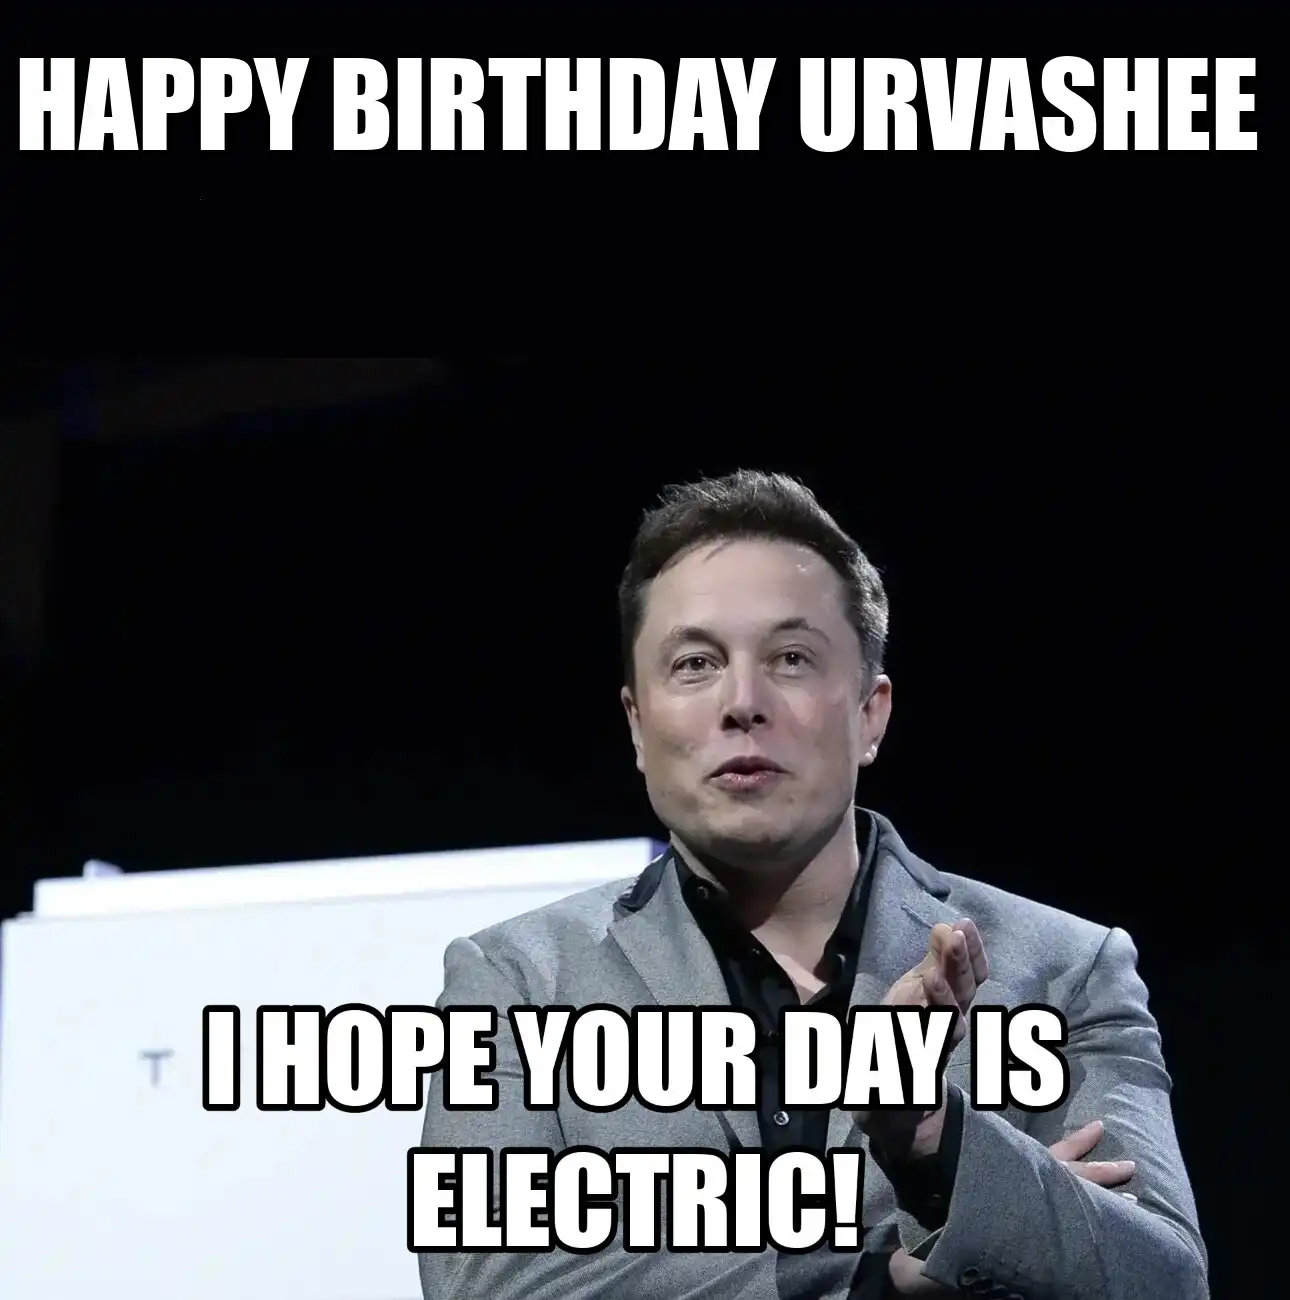 Happy Birthday Urvashee I Hope Your Day Is Electric Meme